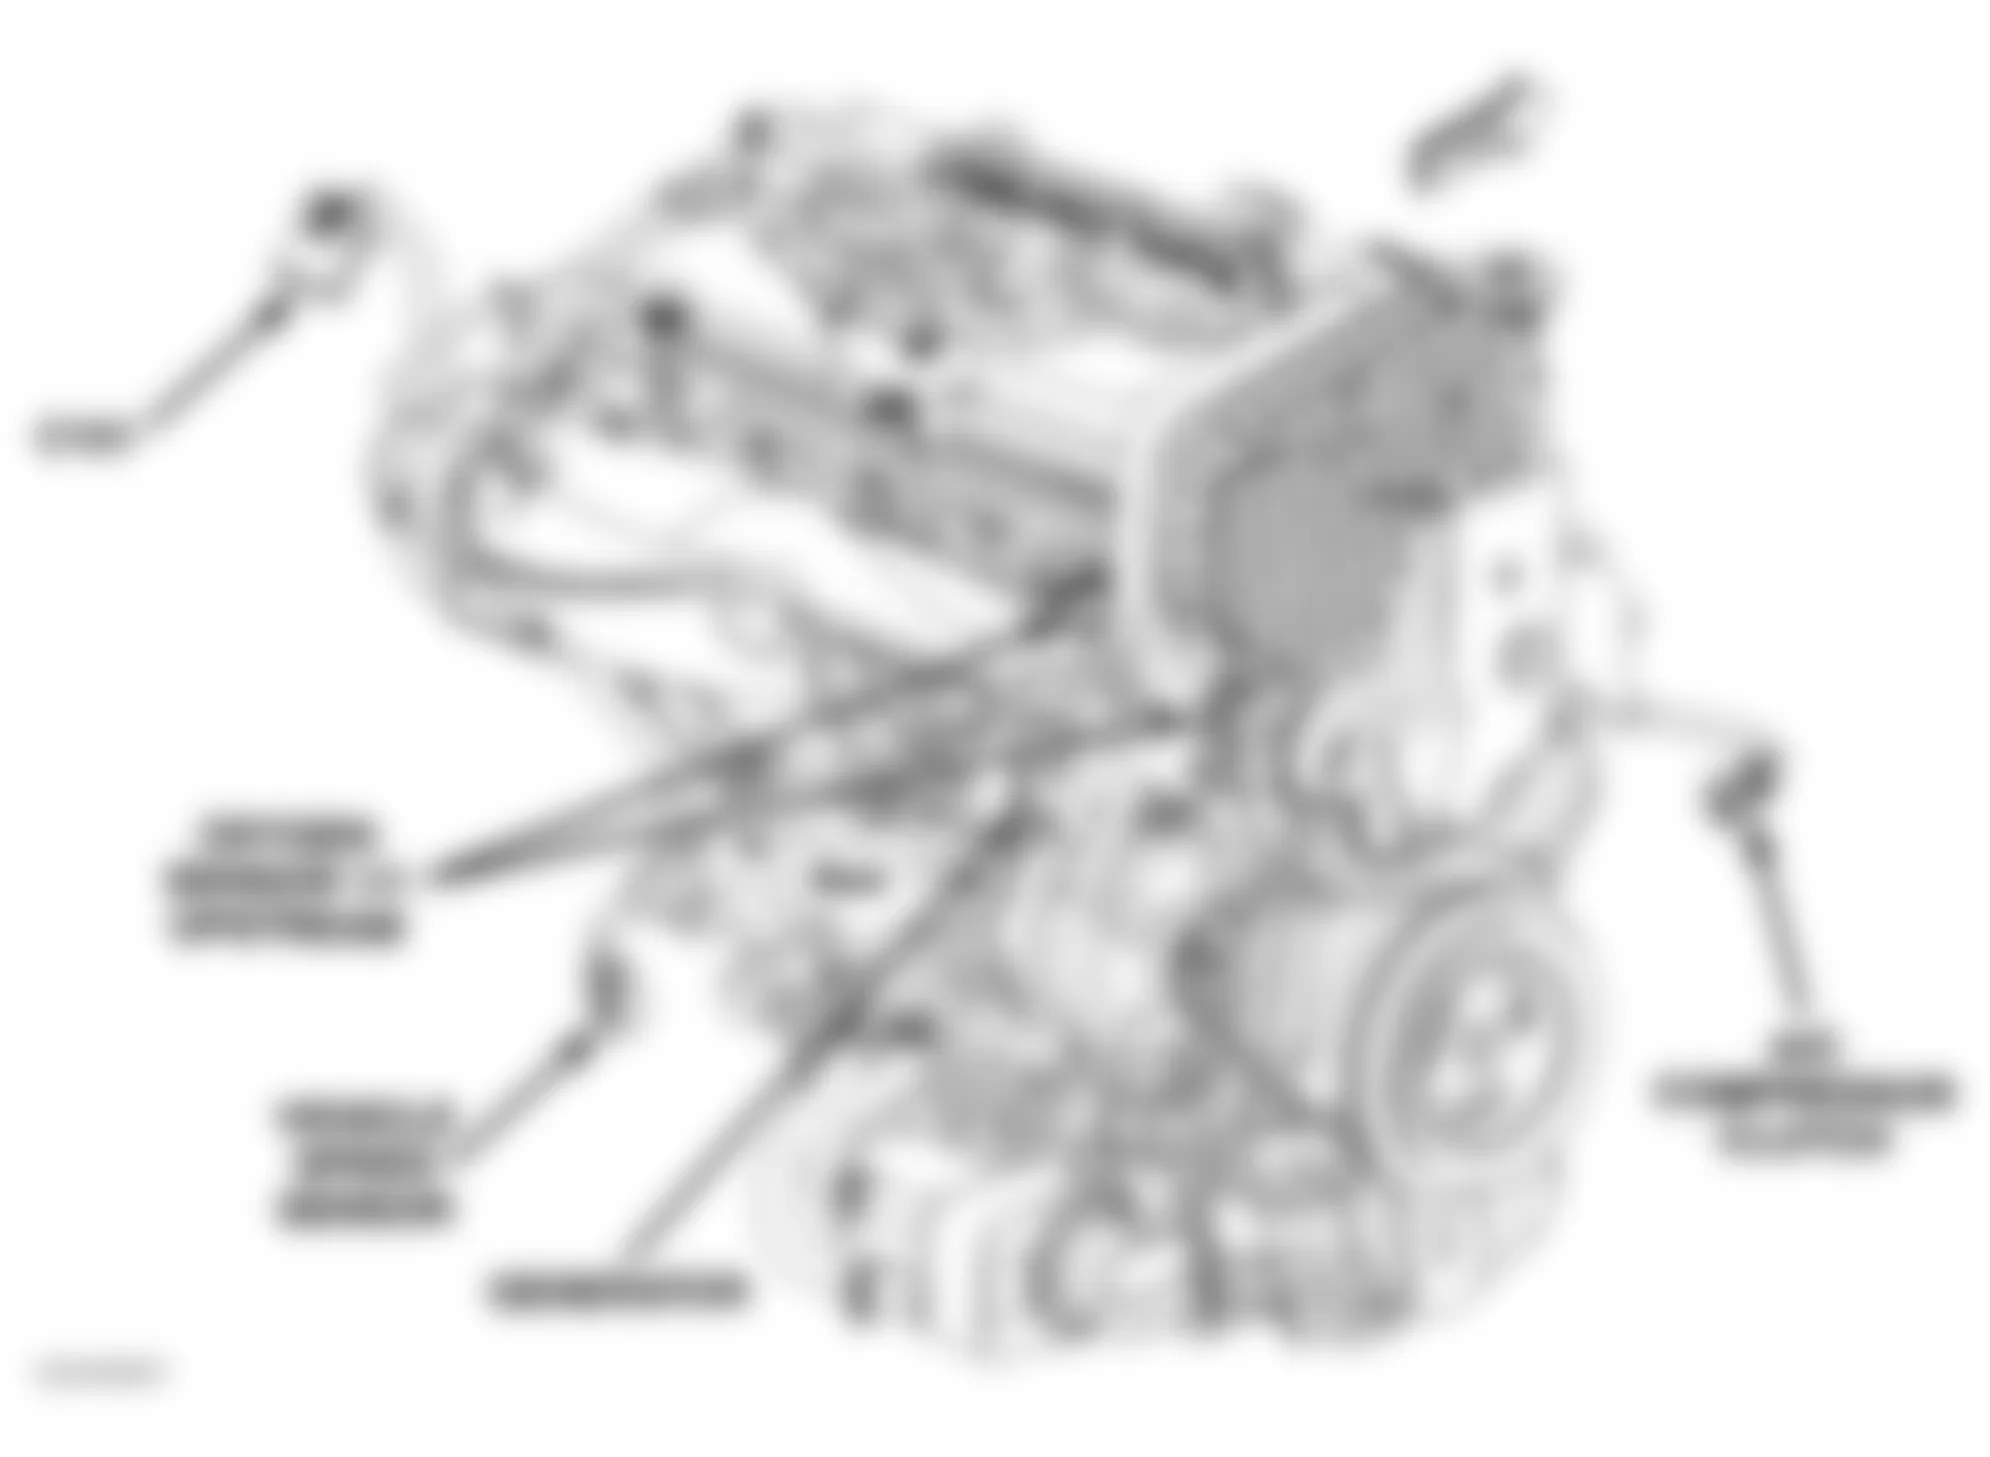 Dodge SX R/T 2005 - Component Locations -  Rear Of Engine (2.4L Turbo)